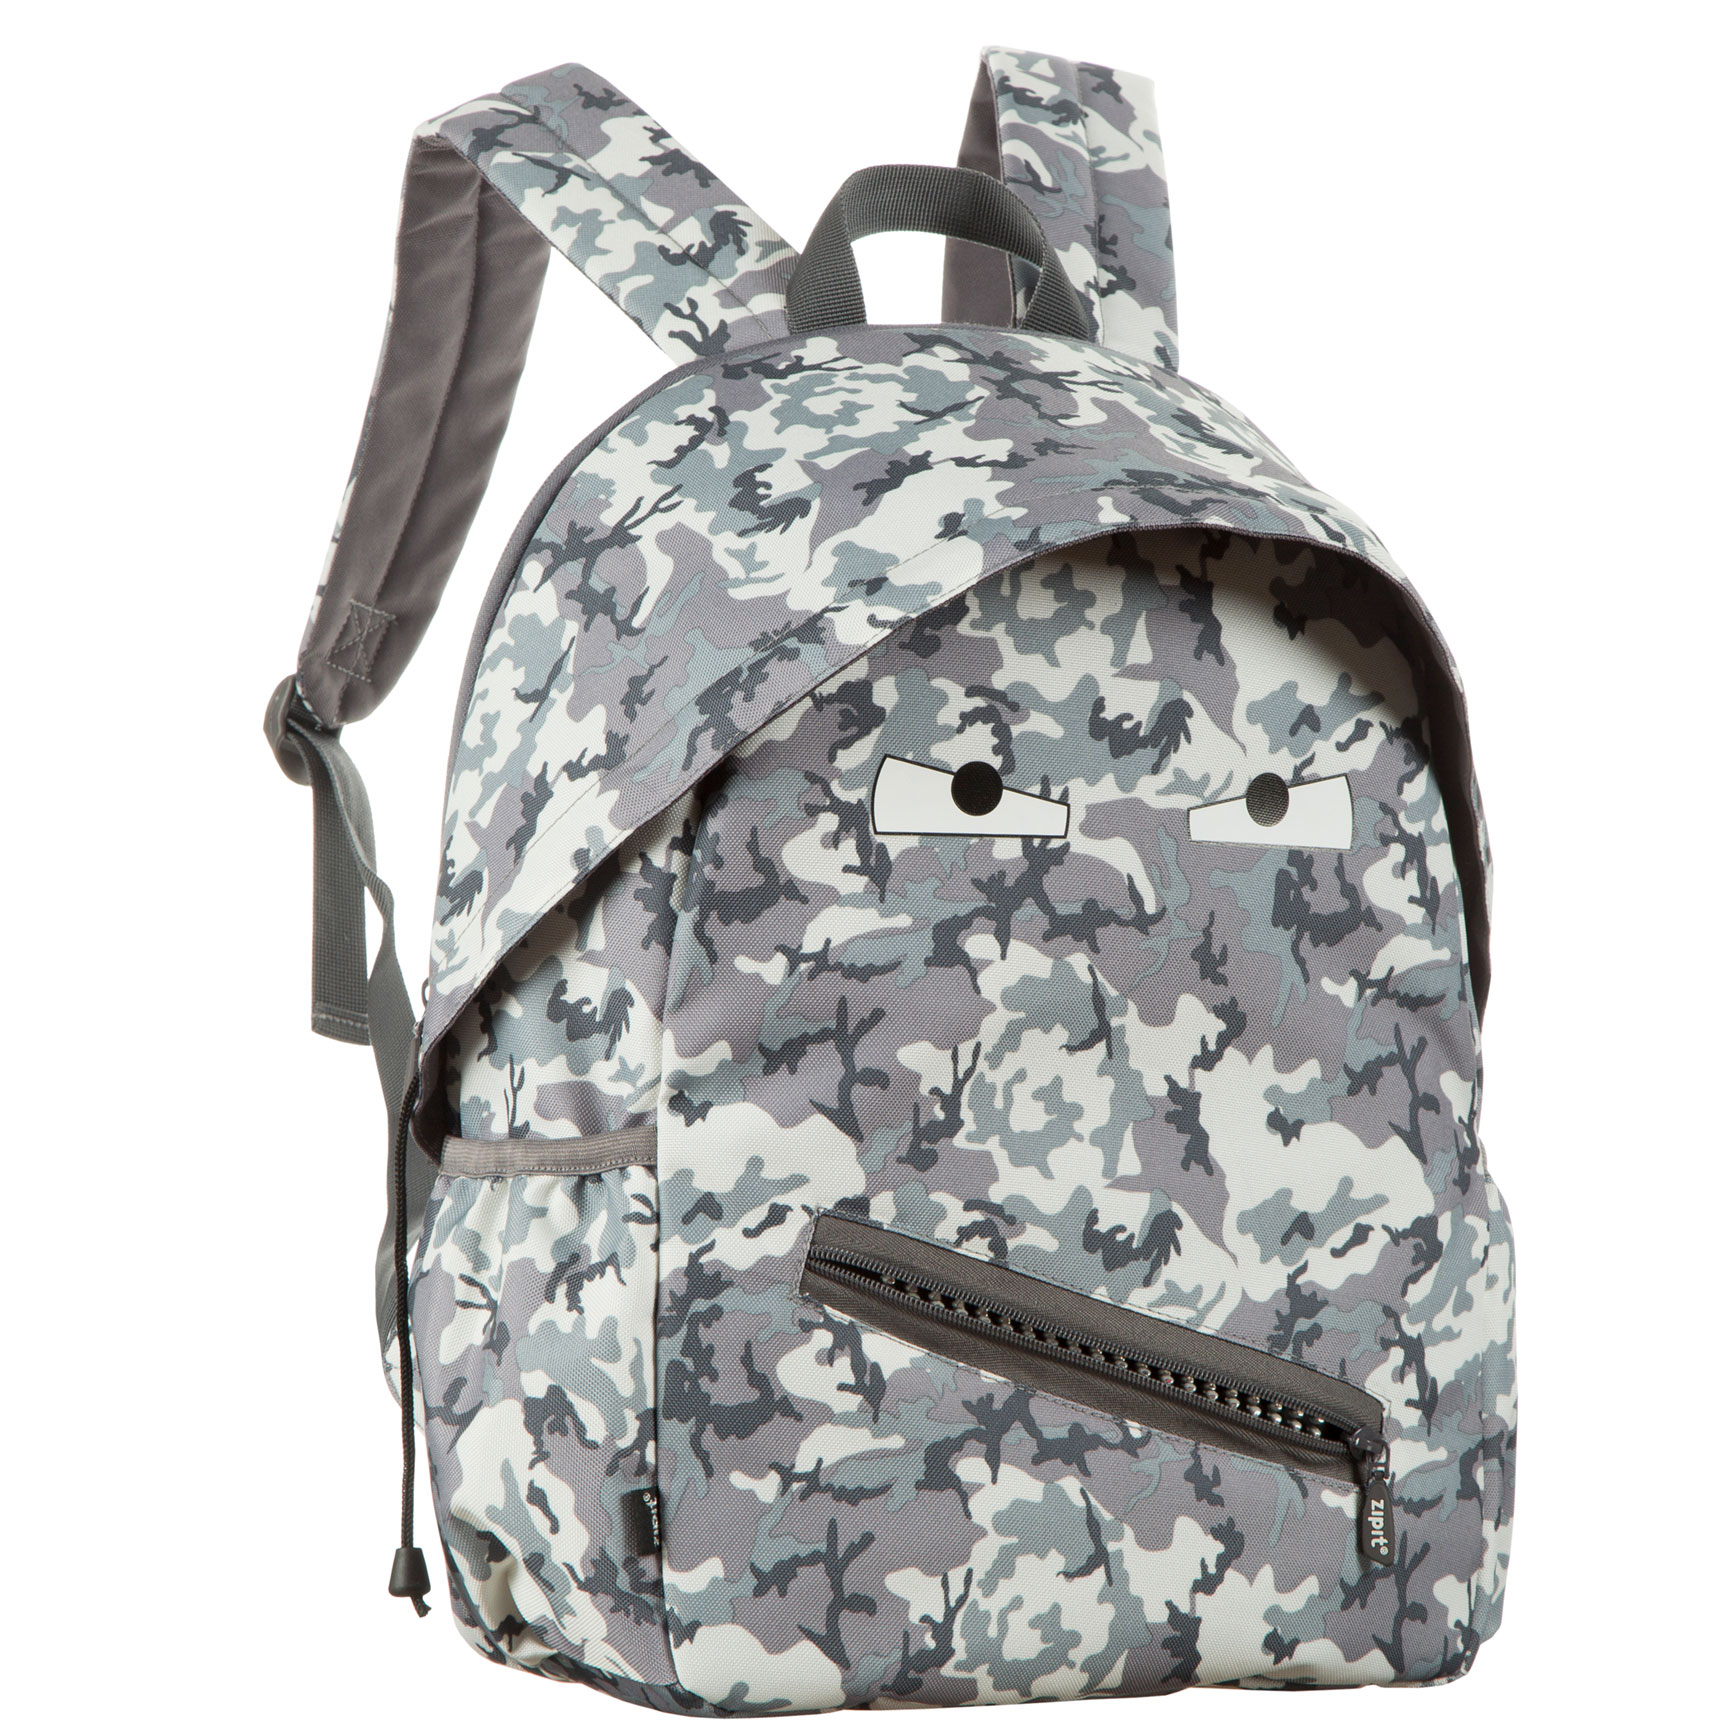 ZIPIT Grillz Backpack for Boys Elementary School & Preschool, Cute Book Bag for Kids (Camo Grey) - image 3 of 10